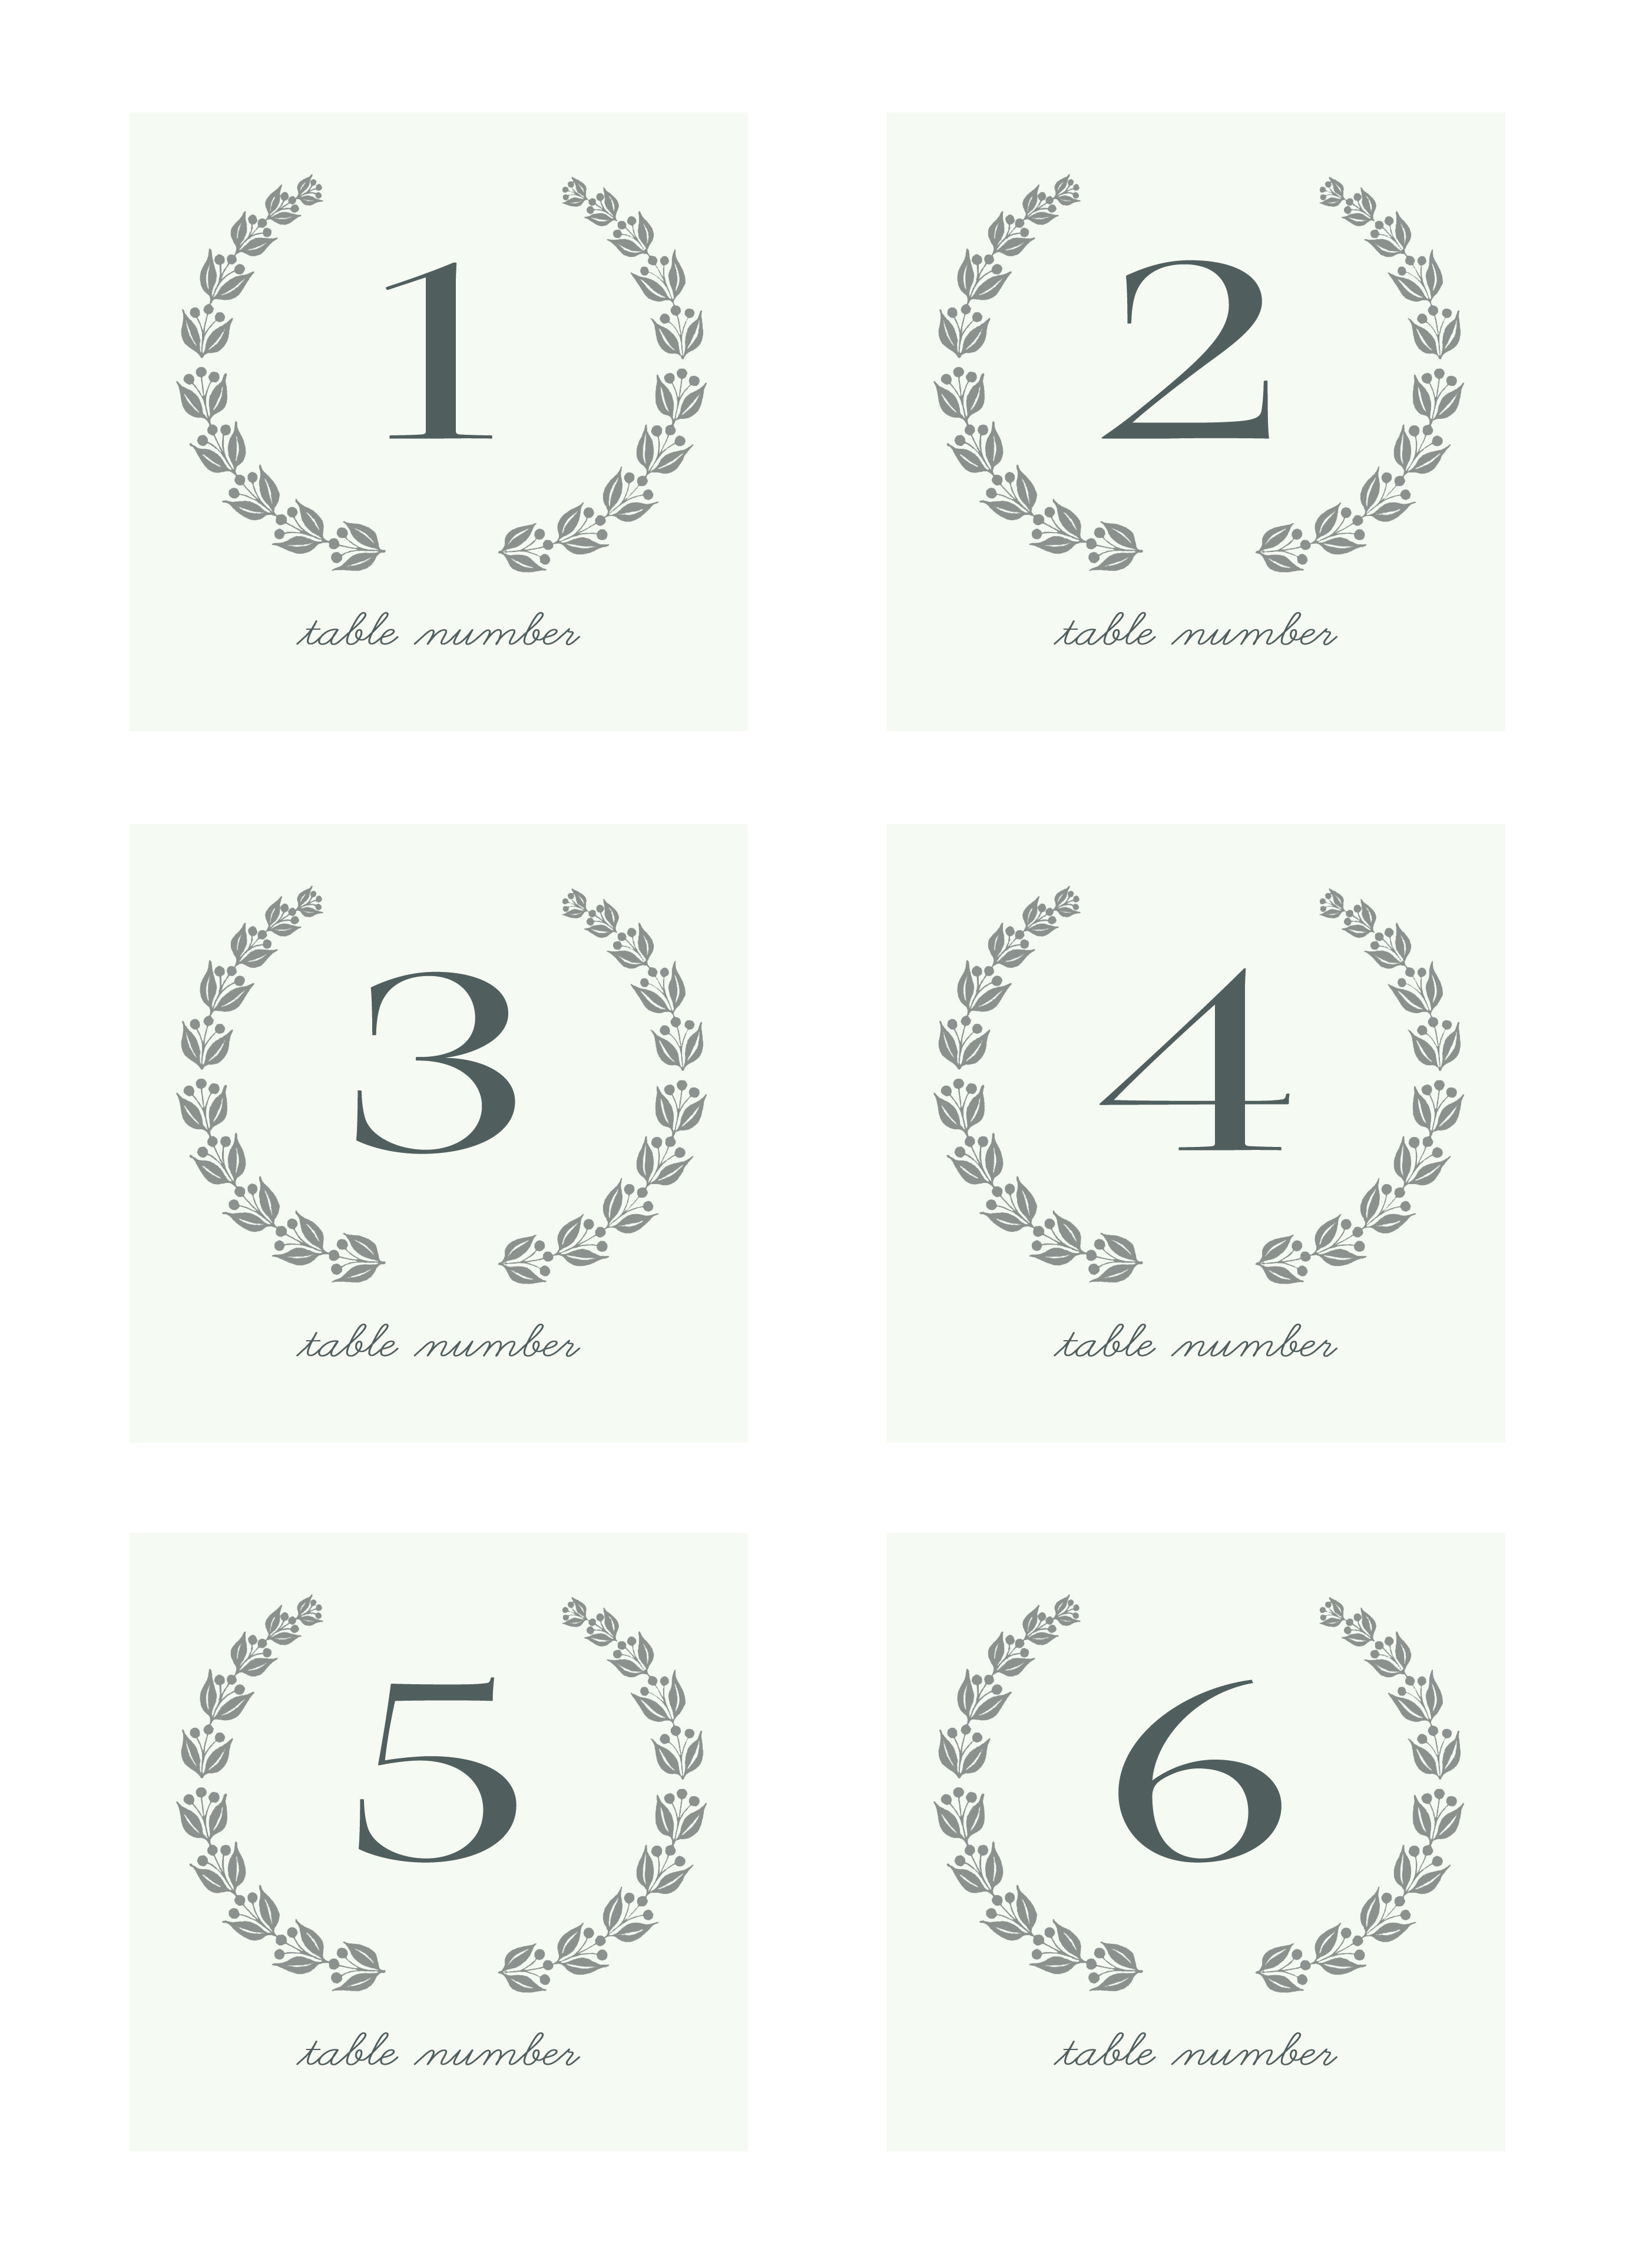 6 Best Images of Printable Table Number Templates - Free Printable